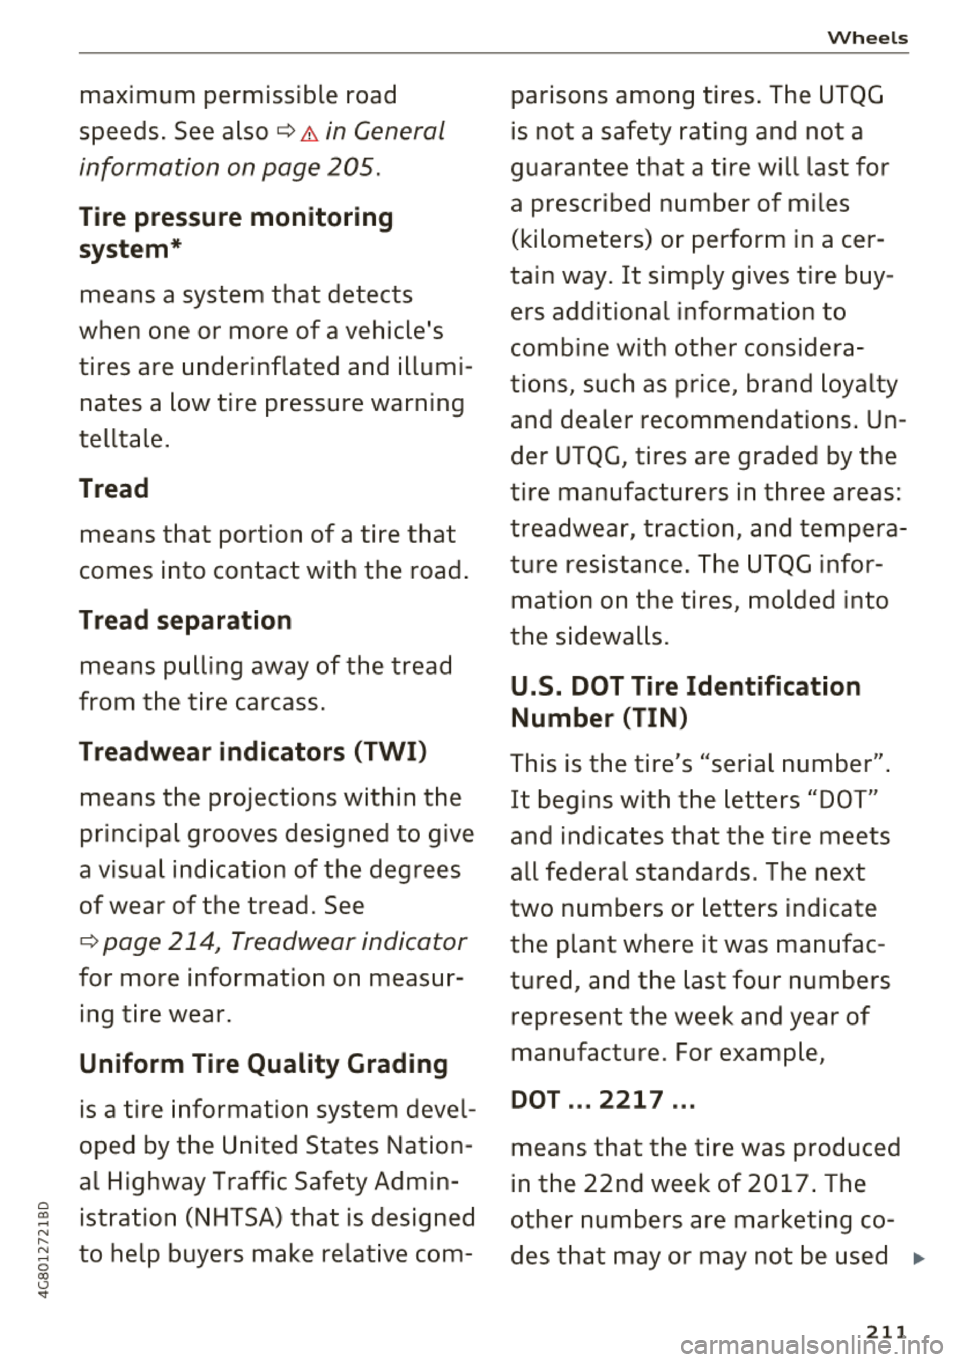 AUDI A7 2018  Owners Manual 0 0) 
-N ,.... N 
-0 0) \.) .. 
maximum  permissible  road  
speeds.  See 
also ¢.& in General 
information  on  page  205. 
Tire pre ssure mon itoring 
system * 
means  a  system  that  detects 
whe